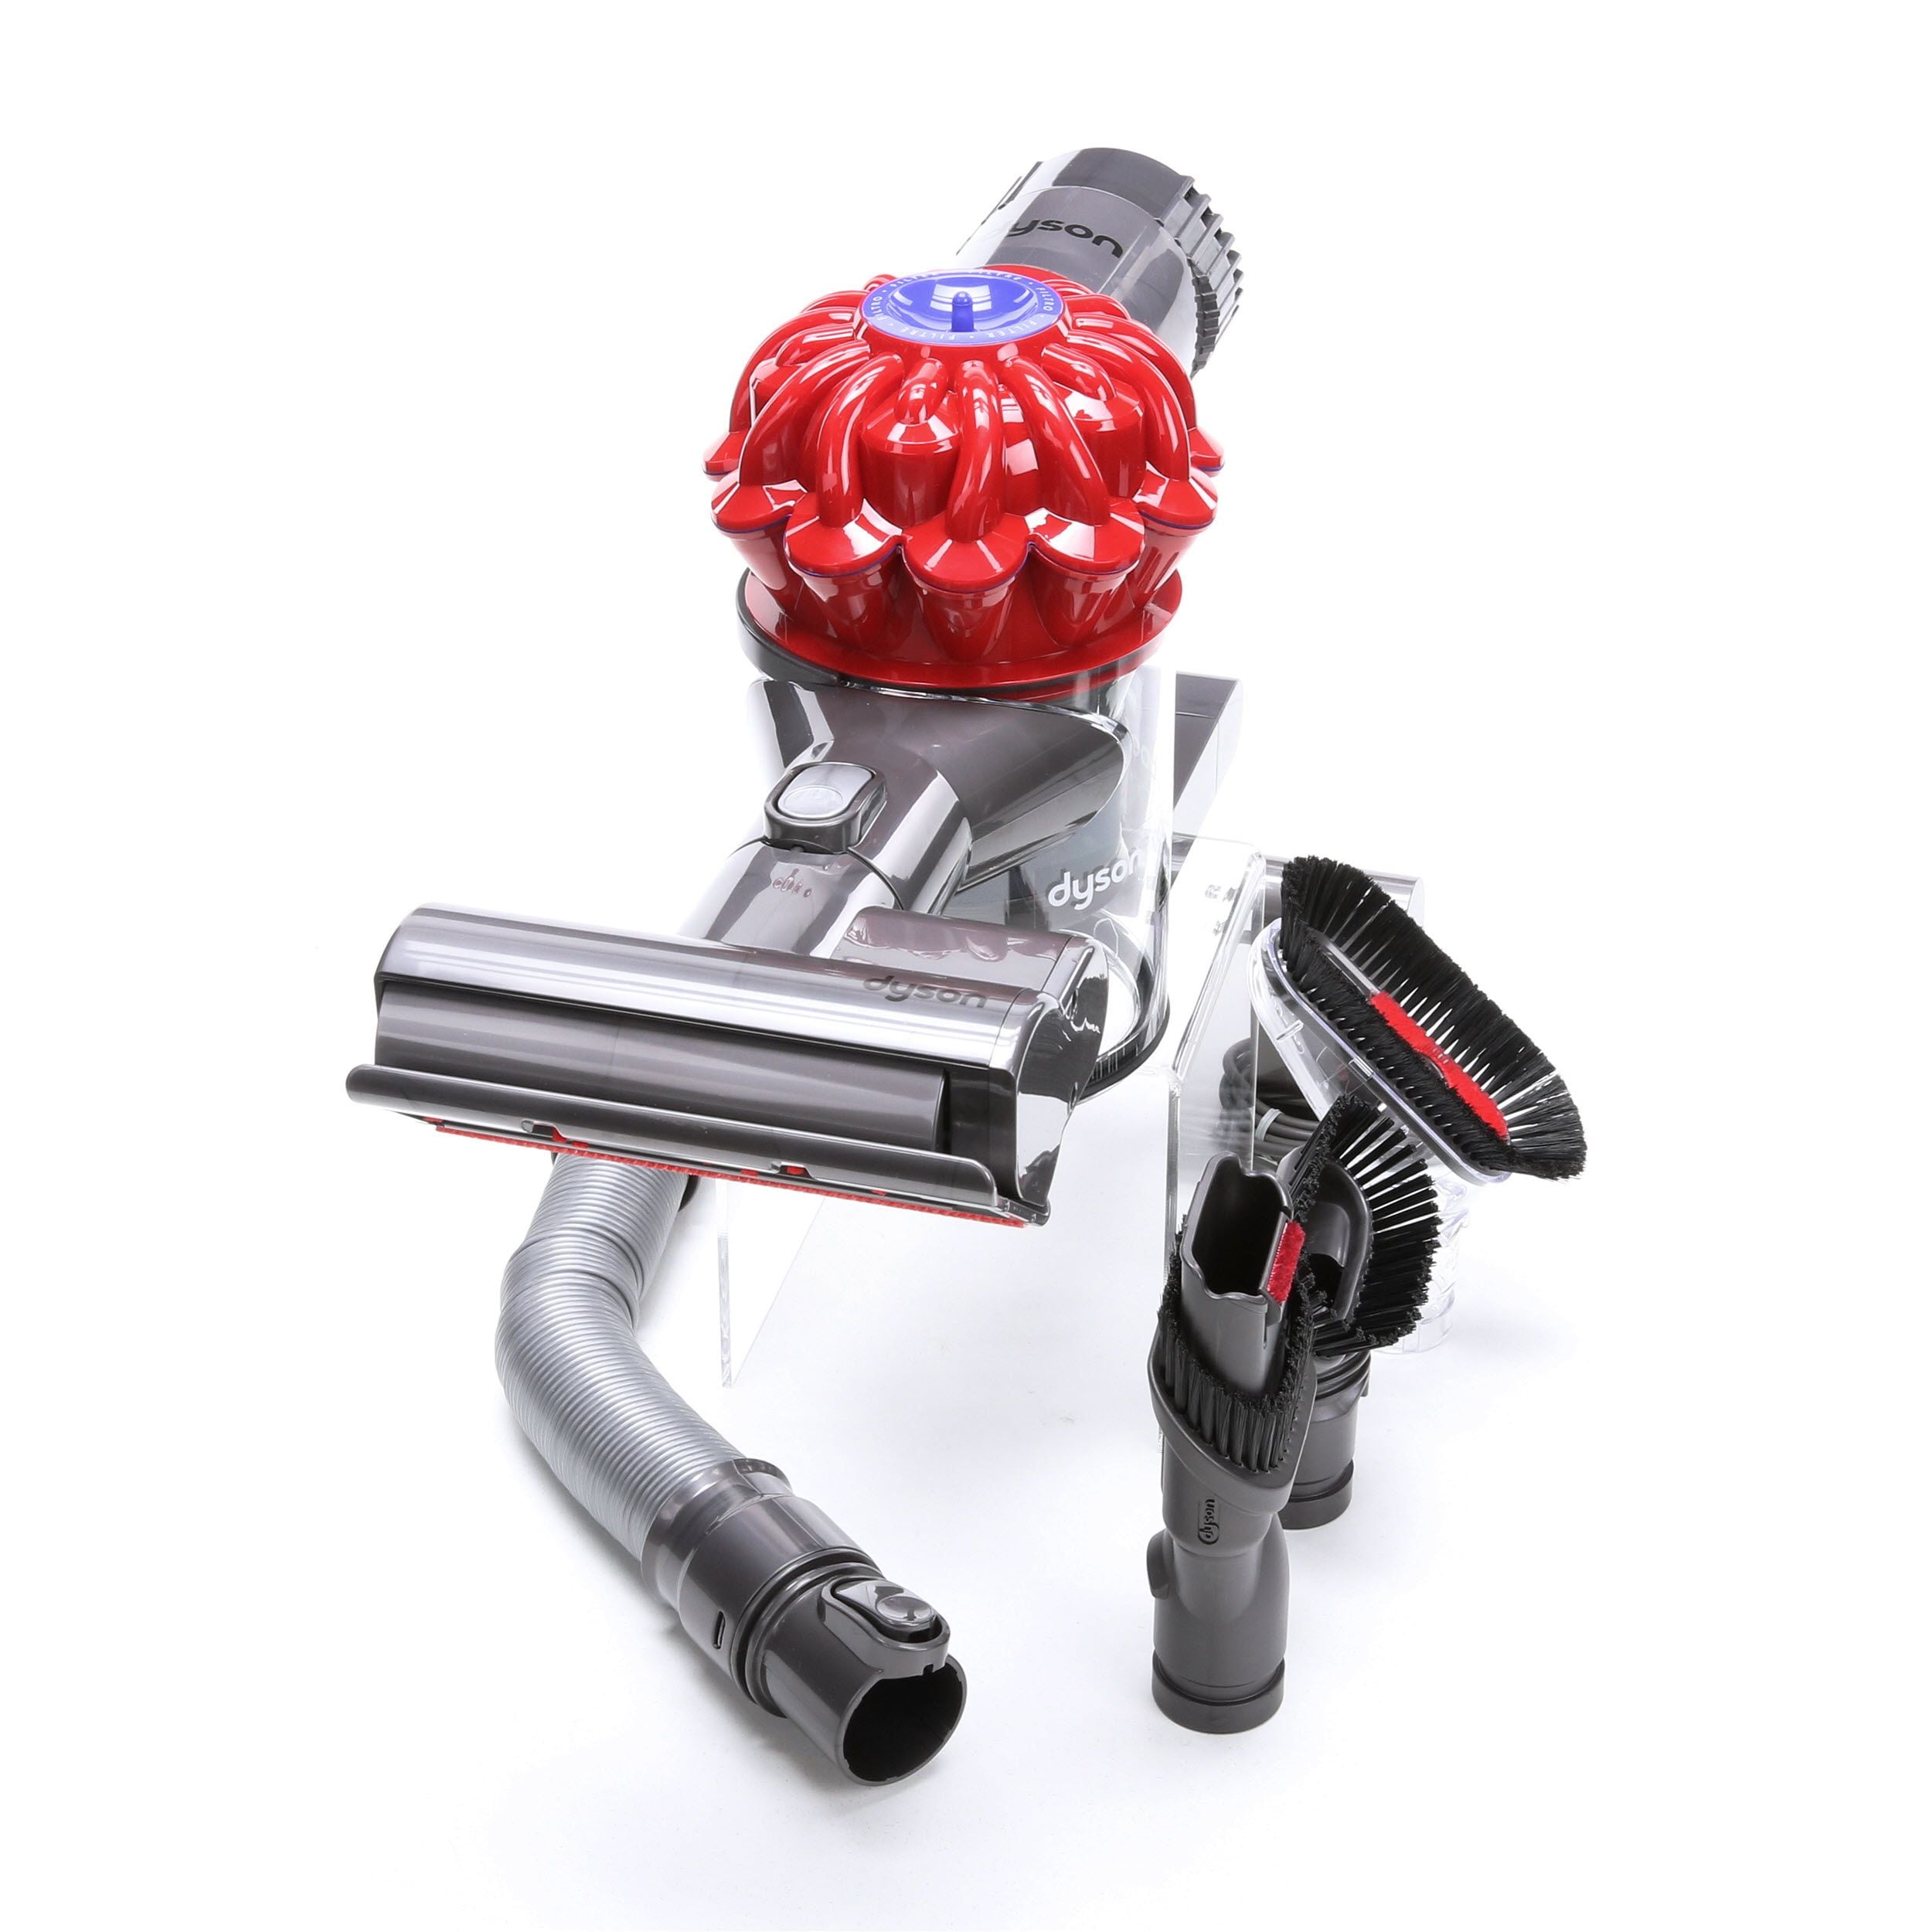 Red Boat Details about   Dyson V6 Car Truck Cordless Cord-Free Handheld Vacuum Cleaner 